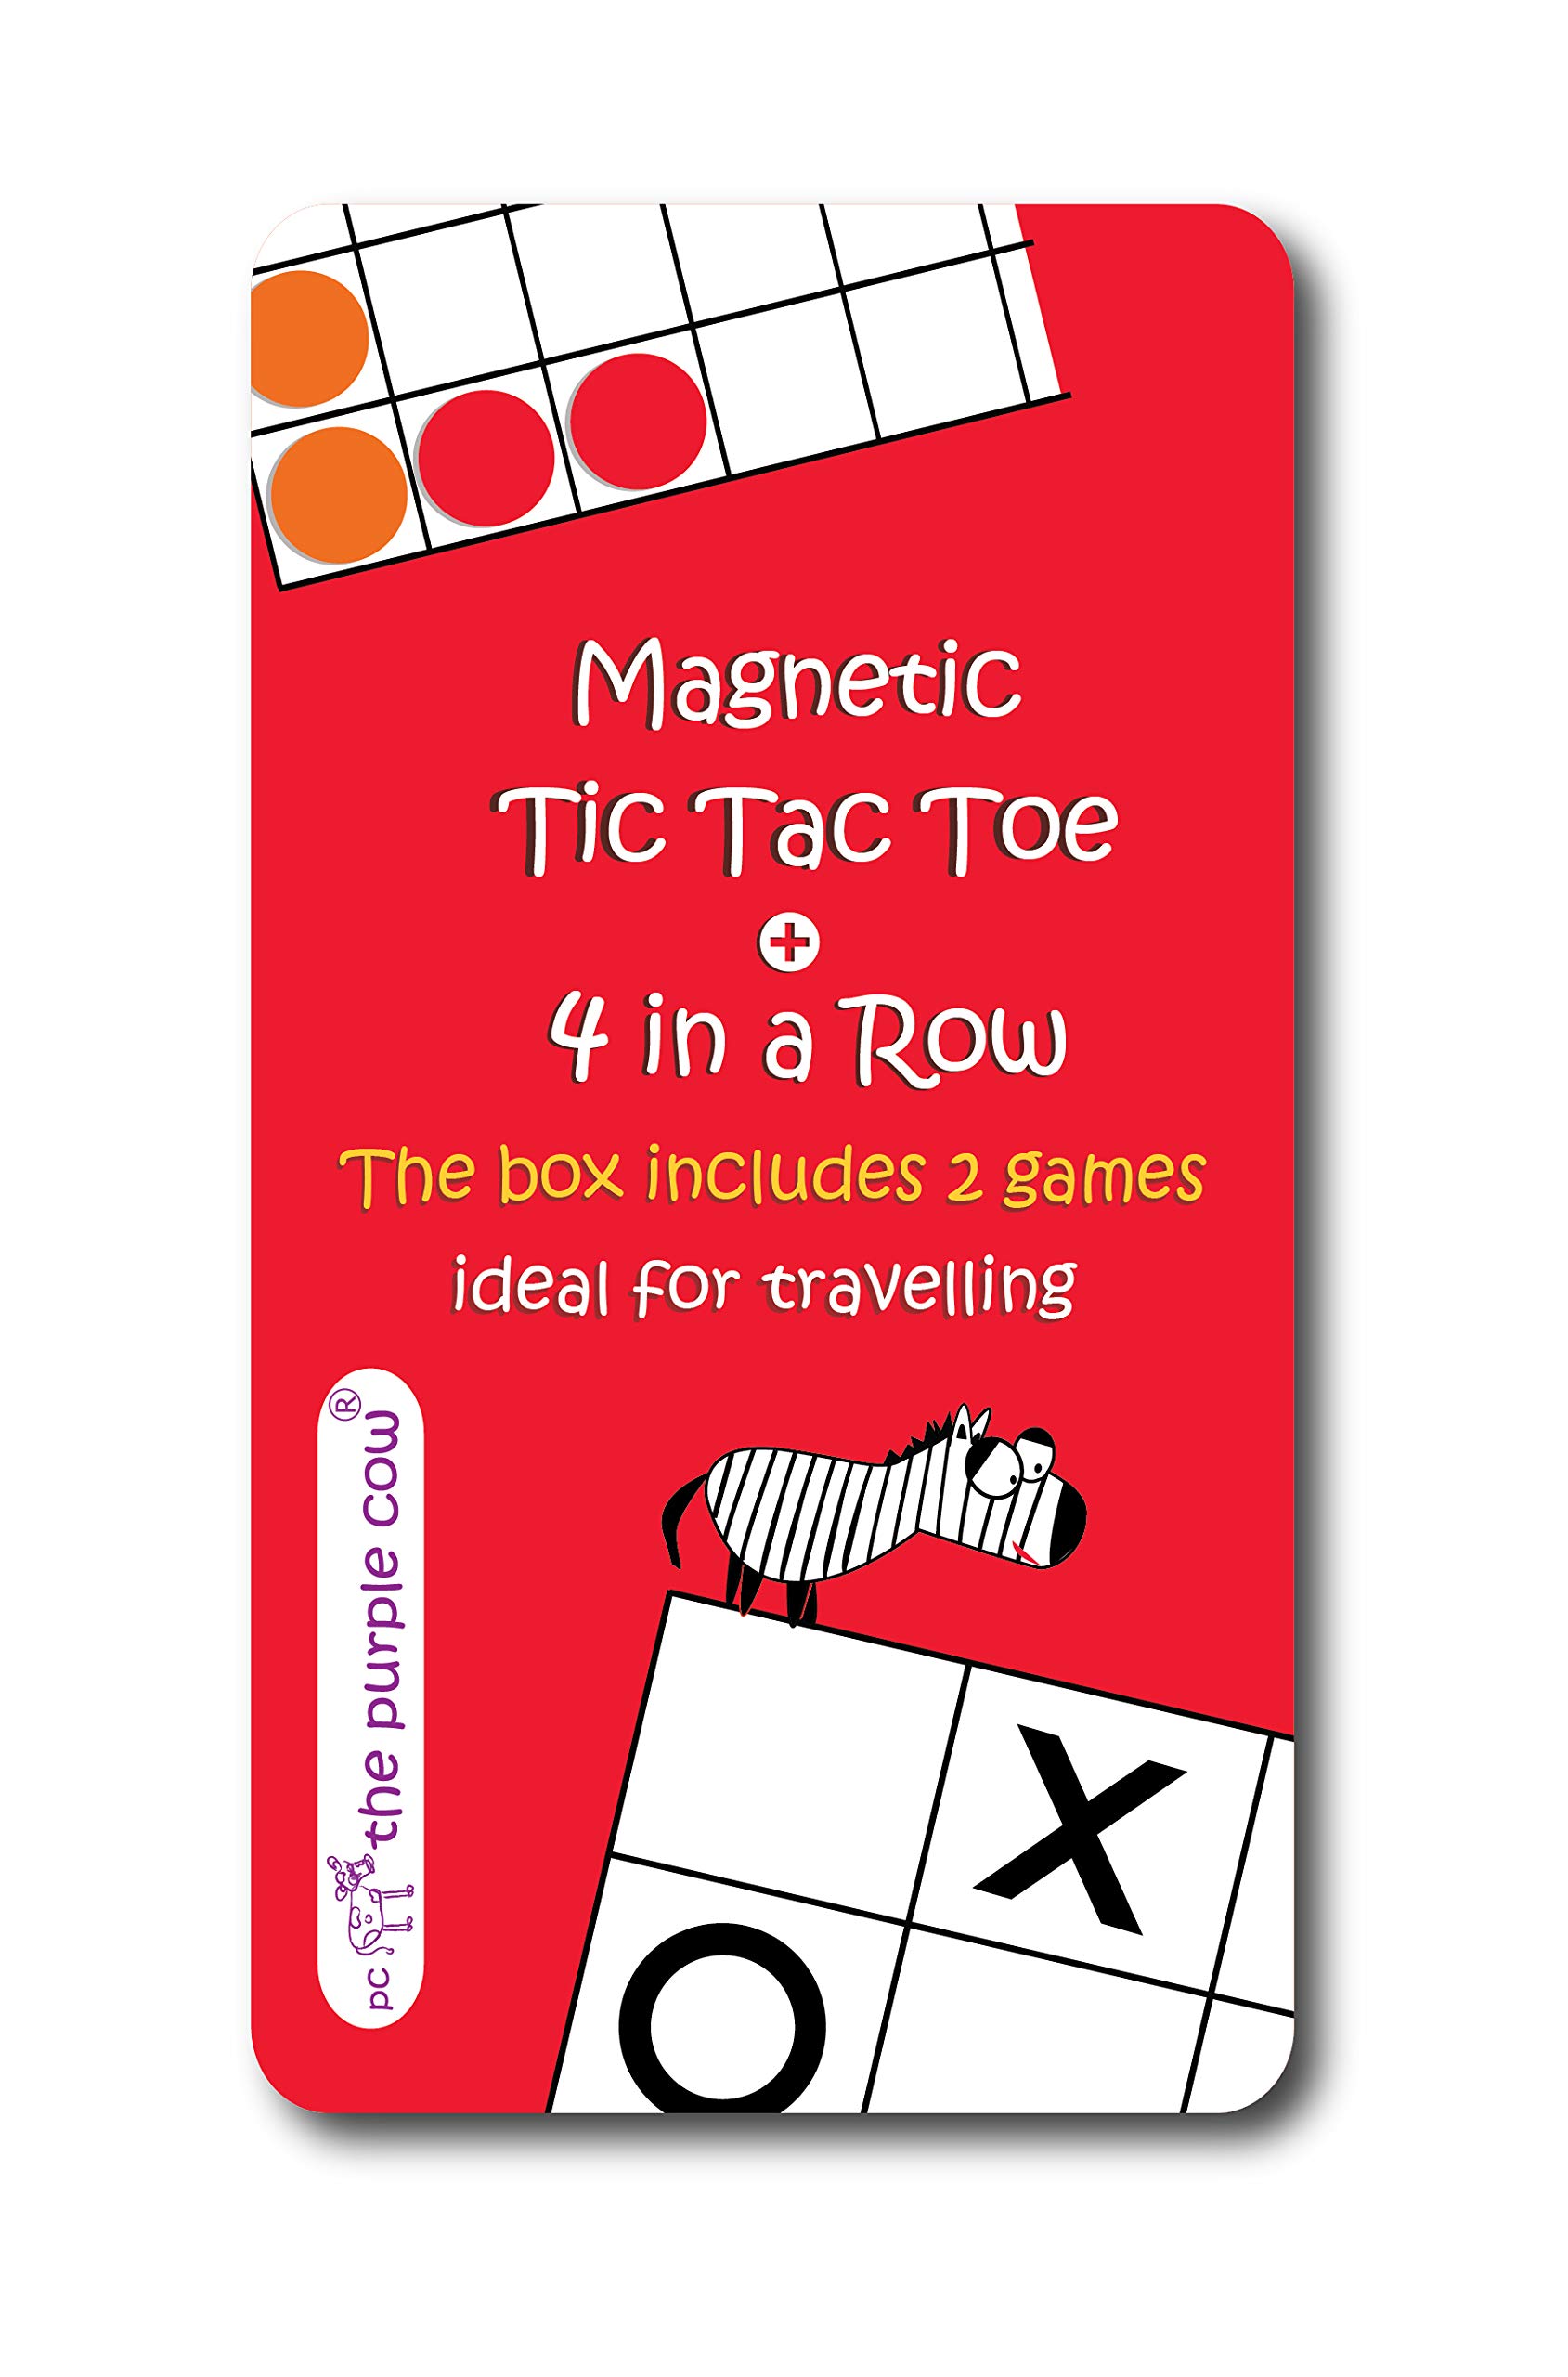 Magnetic Travel Tic Tac Toe - Includes 4 in a Row Game Too - Car Games , Airplane Games and Quiet Games